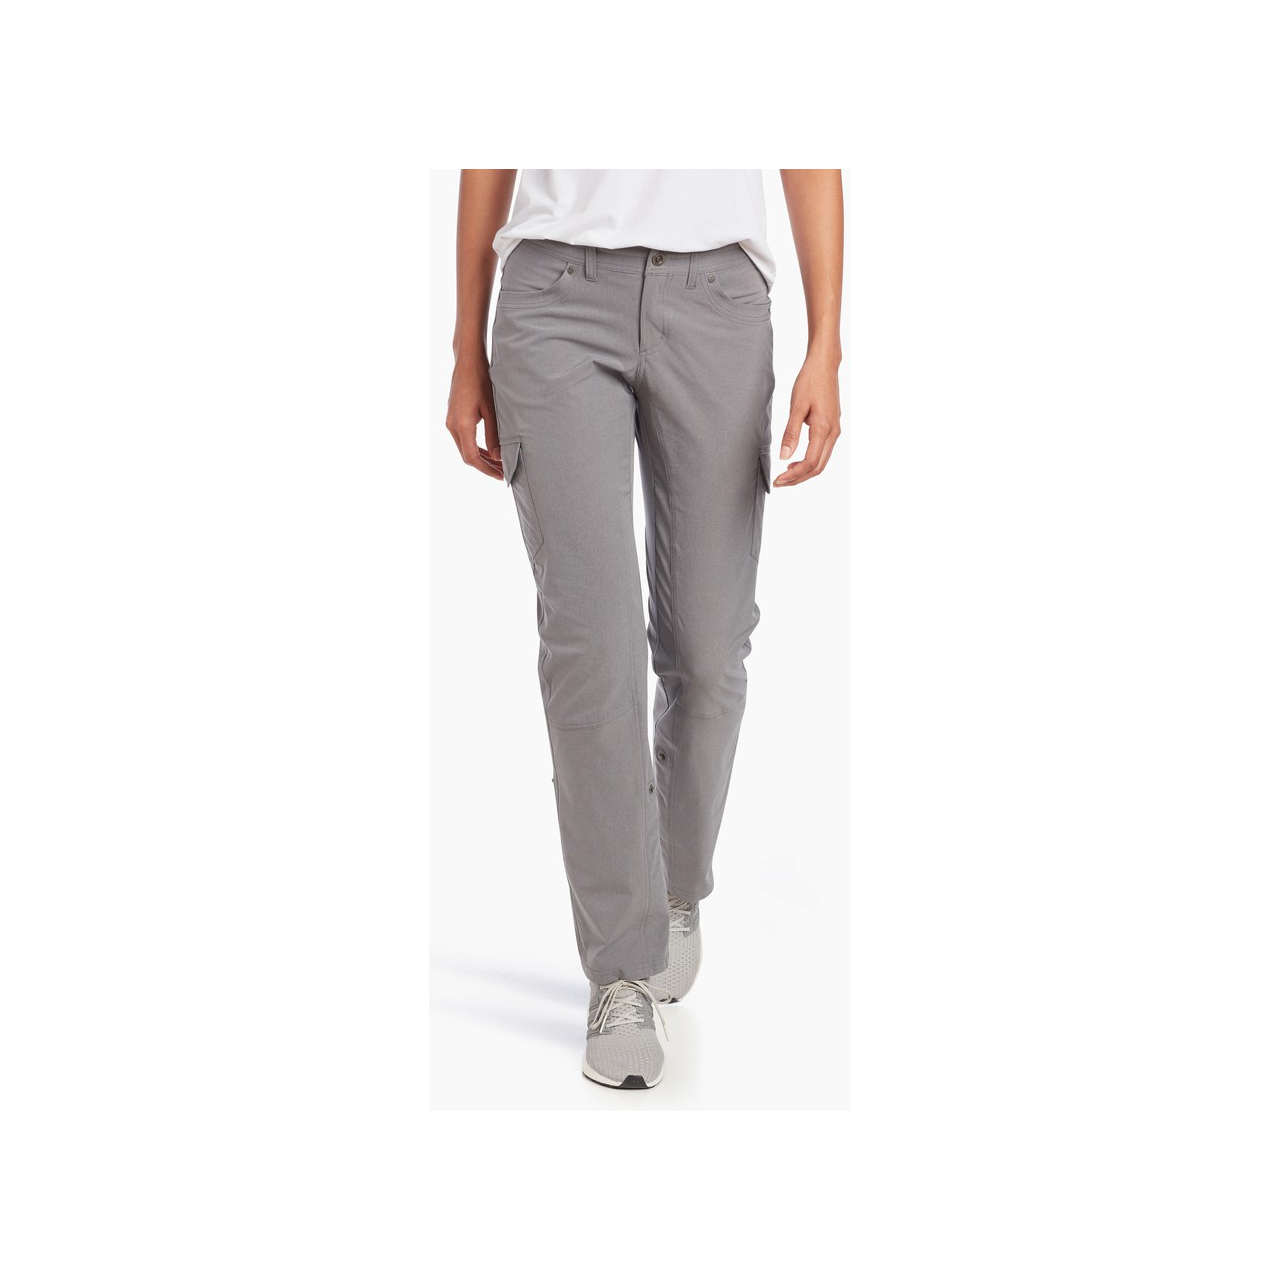 Kuhl Pants Womens 8x31 Gray Free Range Utility Outdoor Straight Leg Size 8  - $32 - From Laura